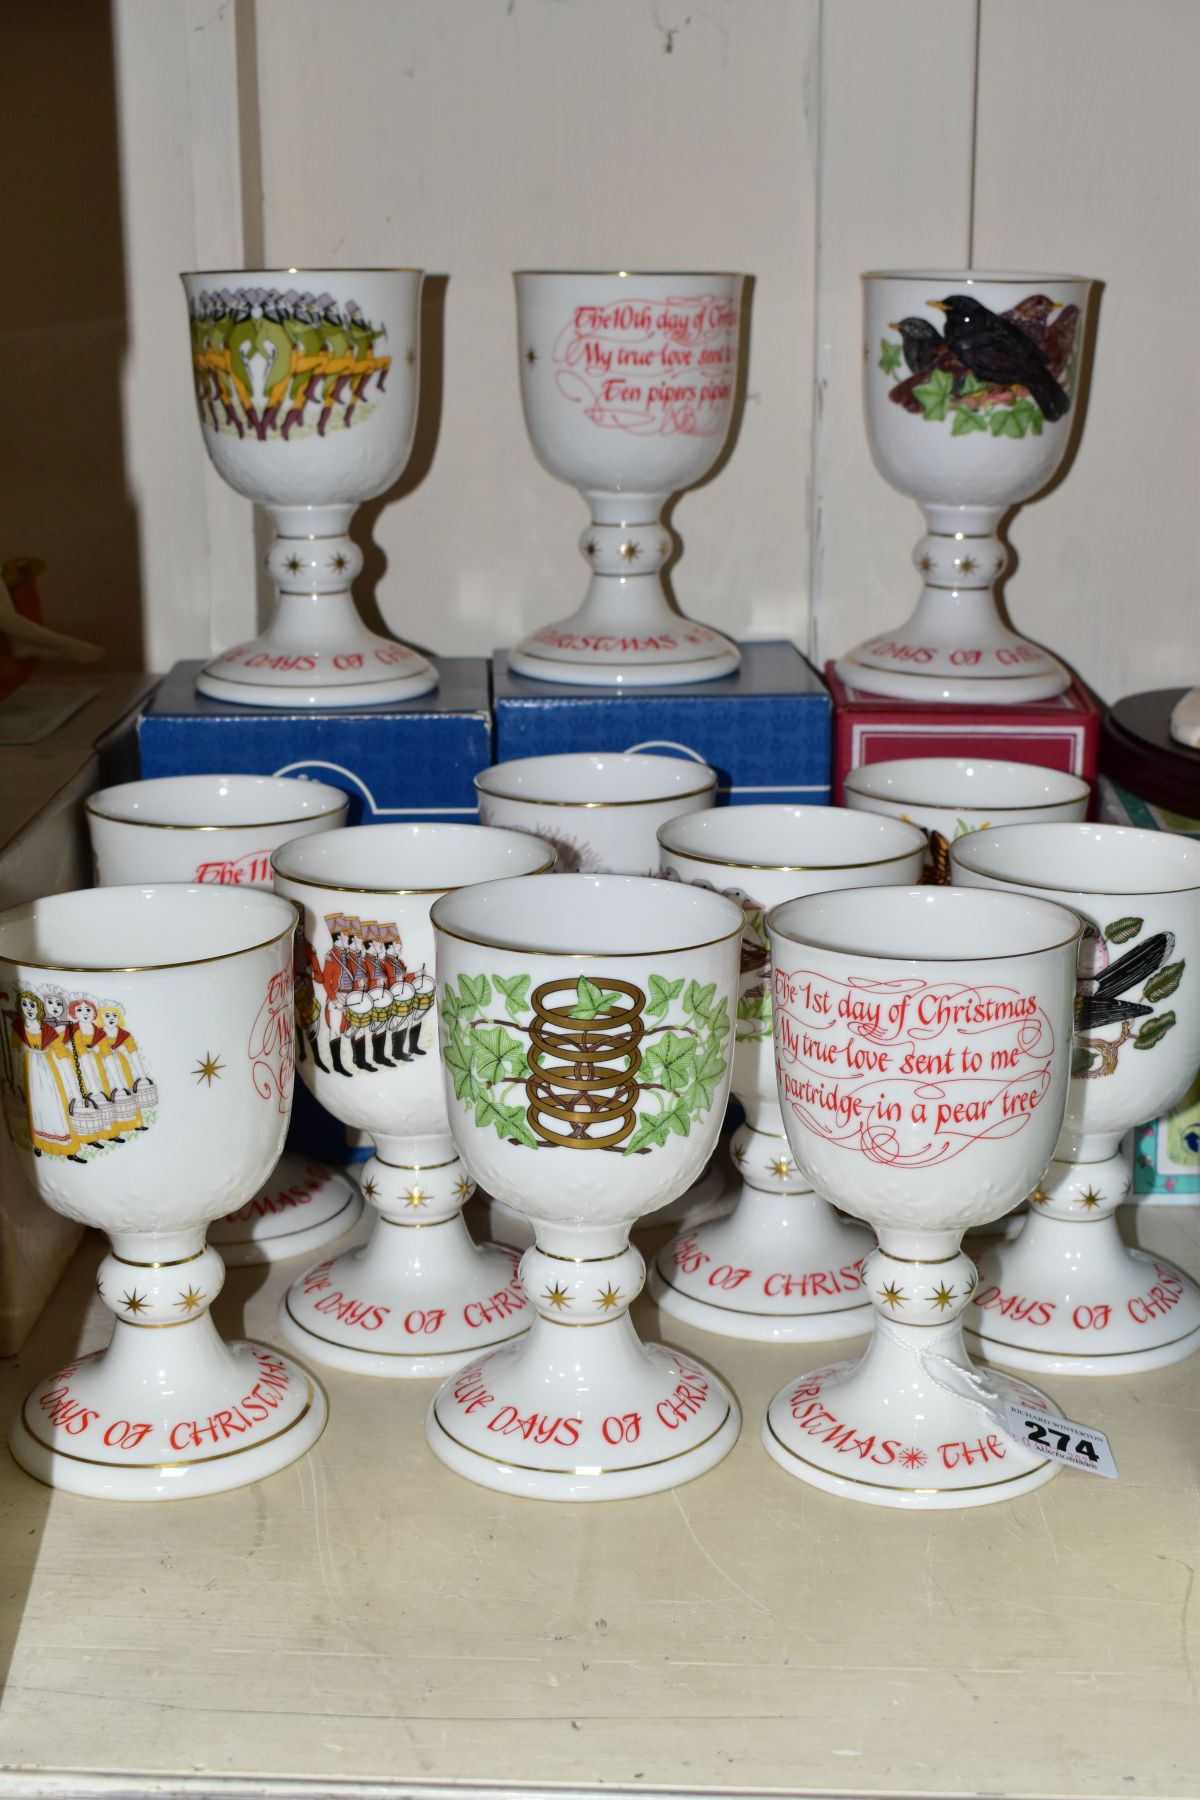 A SET OF TWELVE LIMITED EDITION ROYAL DOULTON GOBLETS, The Twelve Days of Christmas, limited to 10,